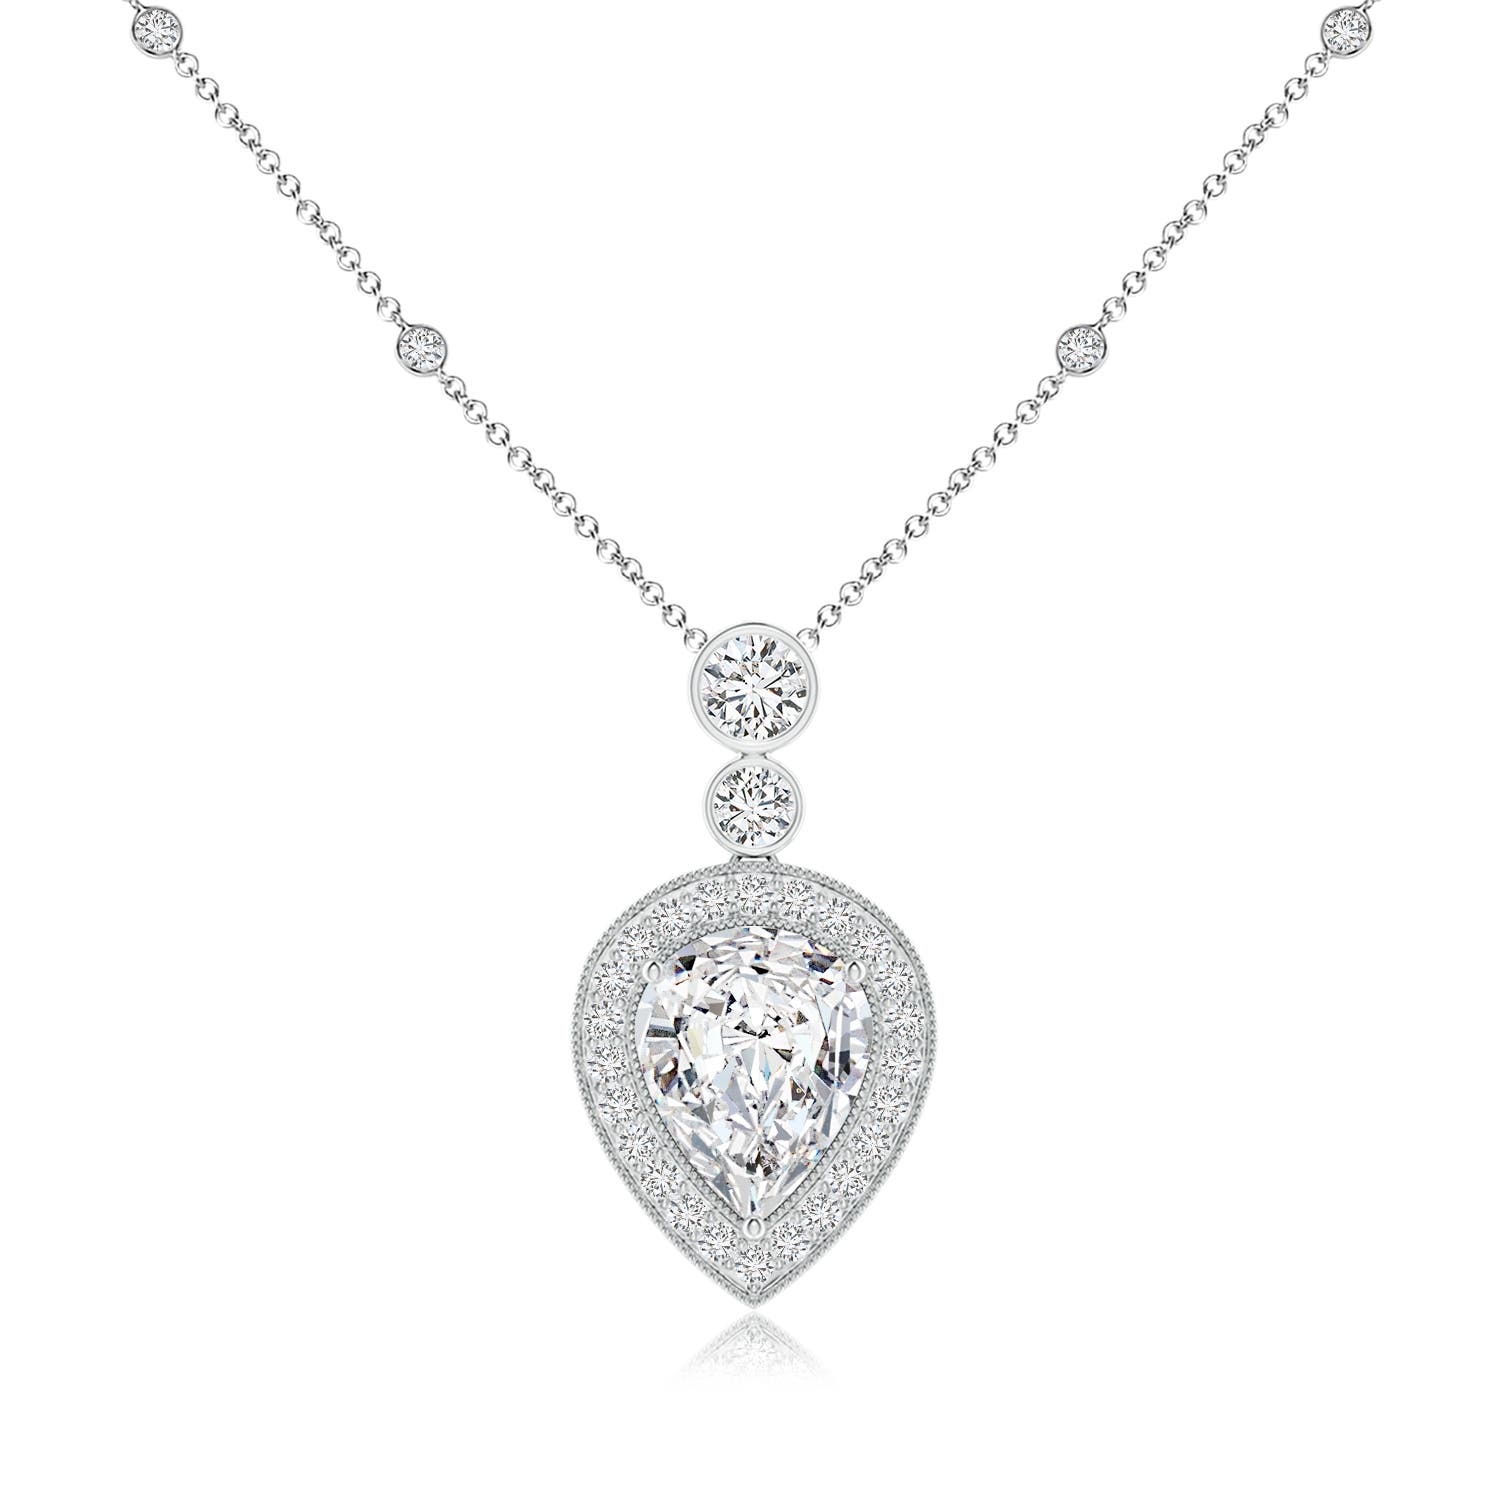 H, SI2 / 2.81 CT / 14 KT White Gold